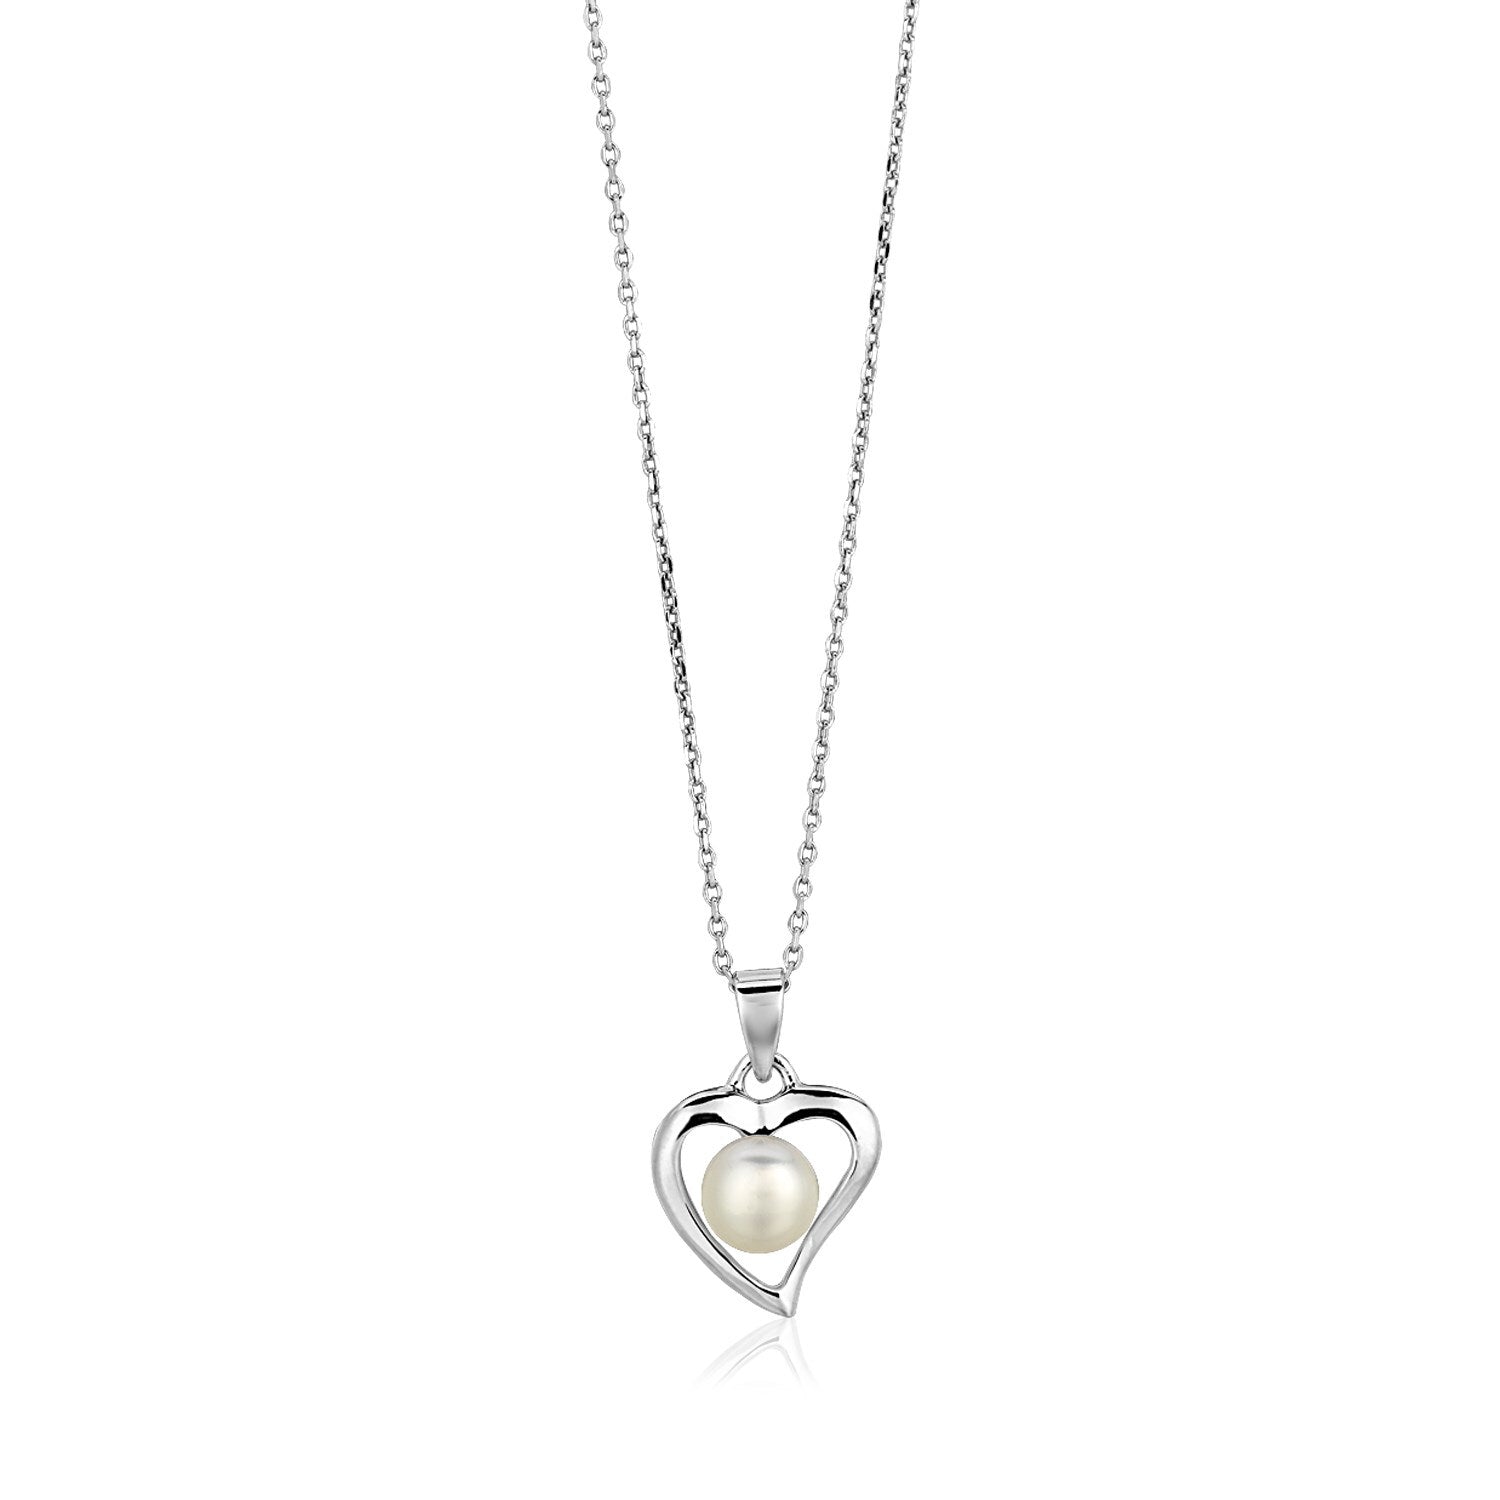 Sterling Silver Open Heart Necklace with Freshwater Pearl, size 18''